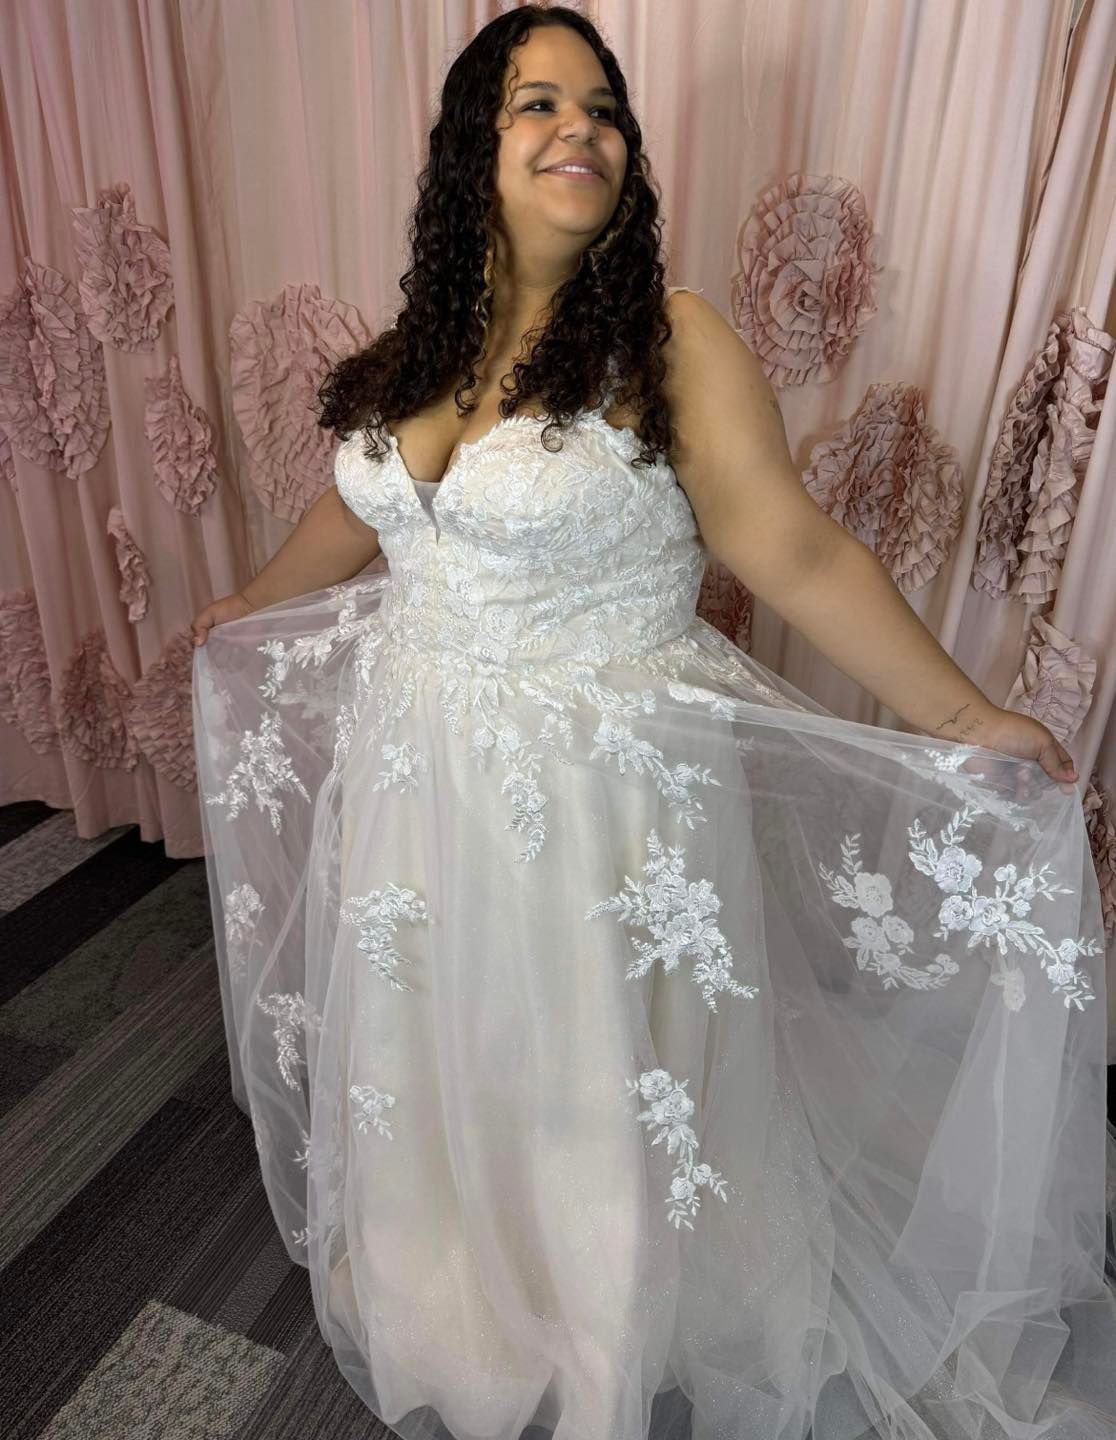 Save big March 28 through March 30 at bargain bridal spin the wheel up to $200 off your wedding gown dresses marked to fly out the door Contact ustoda